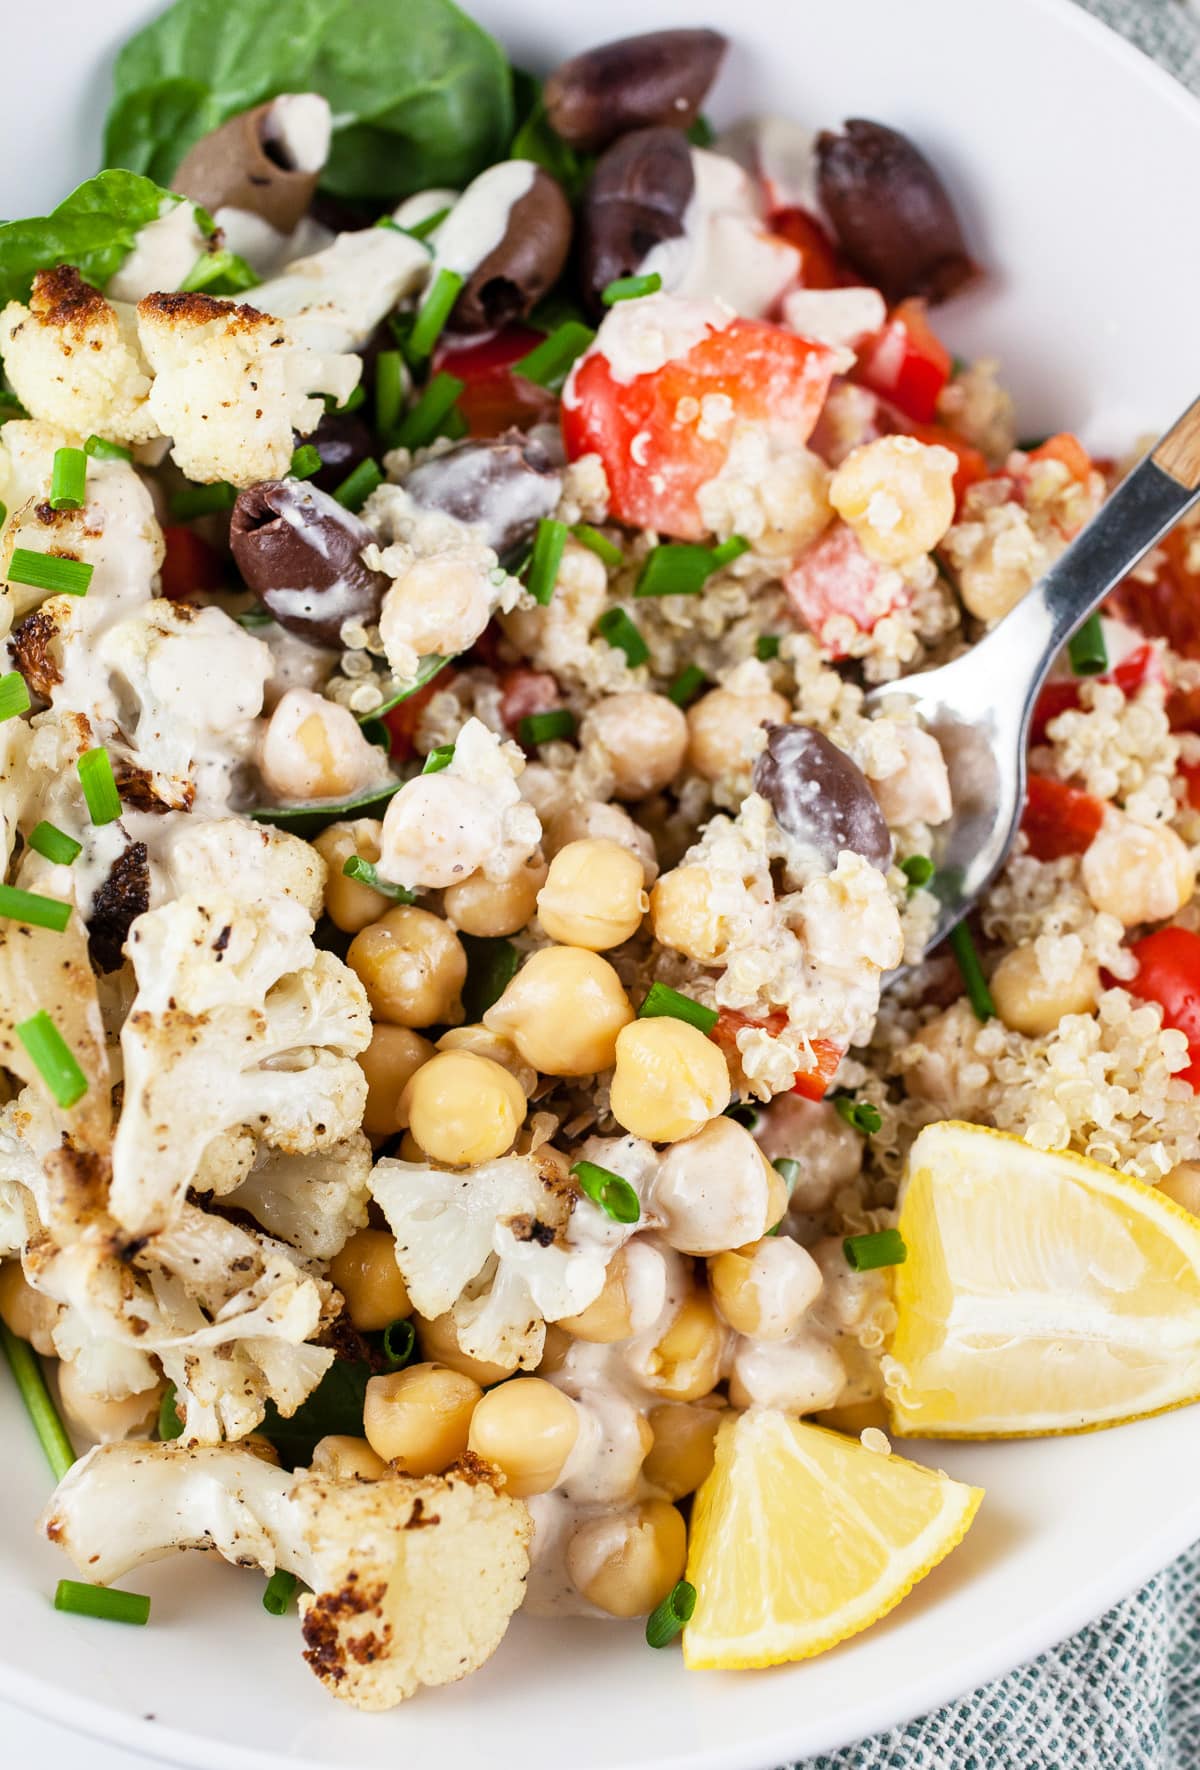 Mediterranean chickpea quinoa bowl with Kalamata olives, red bell peppers, tahini dressing, and lemon wedges.